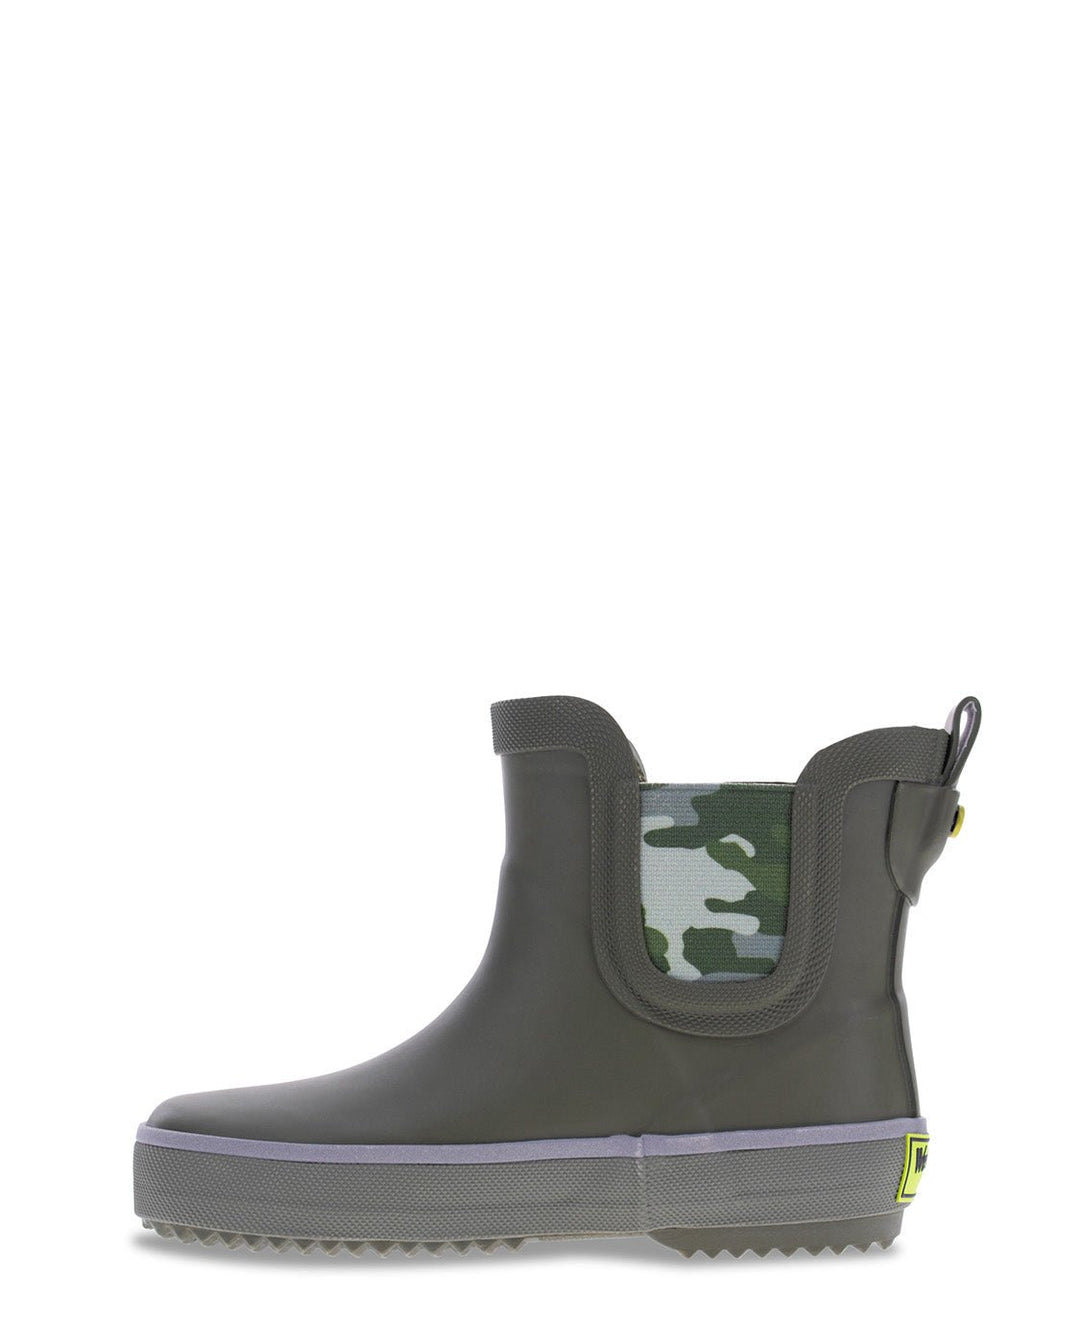 New! Kids Element Chelsea Rain Boot - Olive - Western Chief